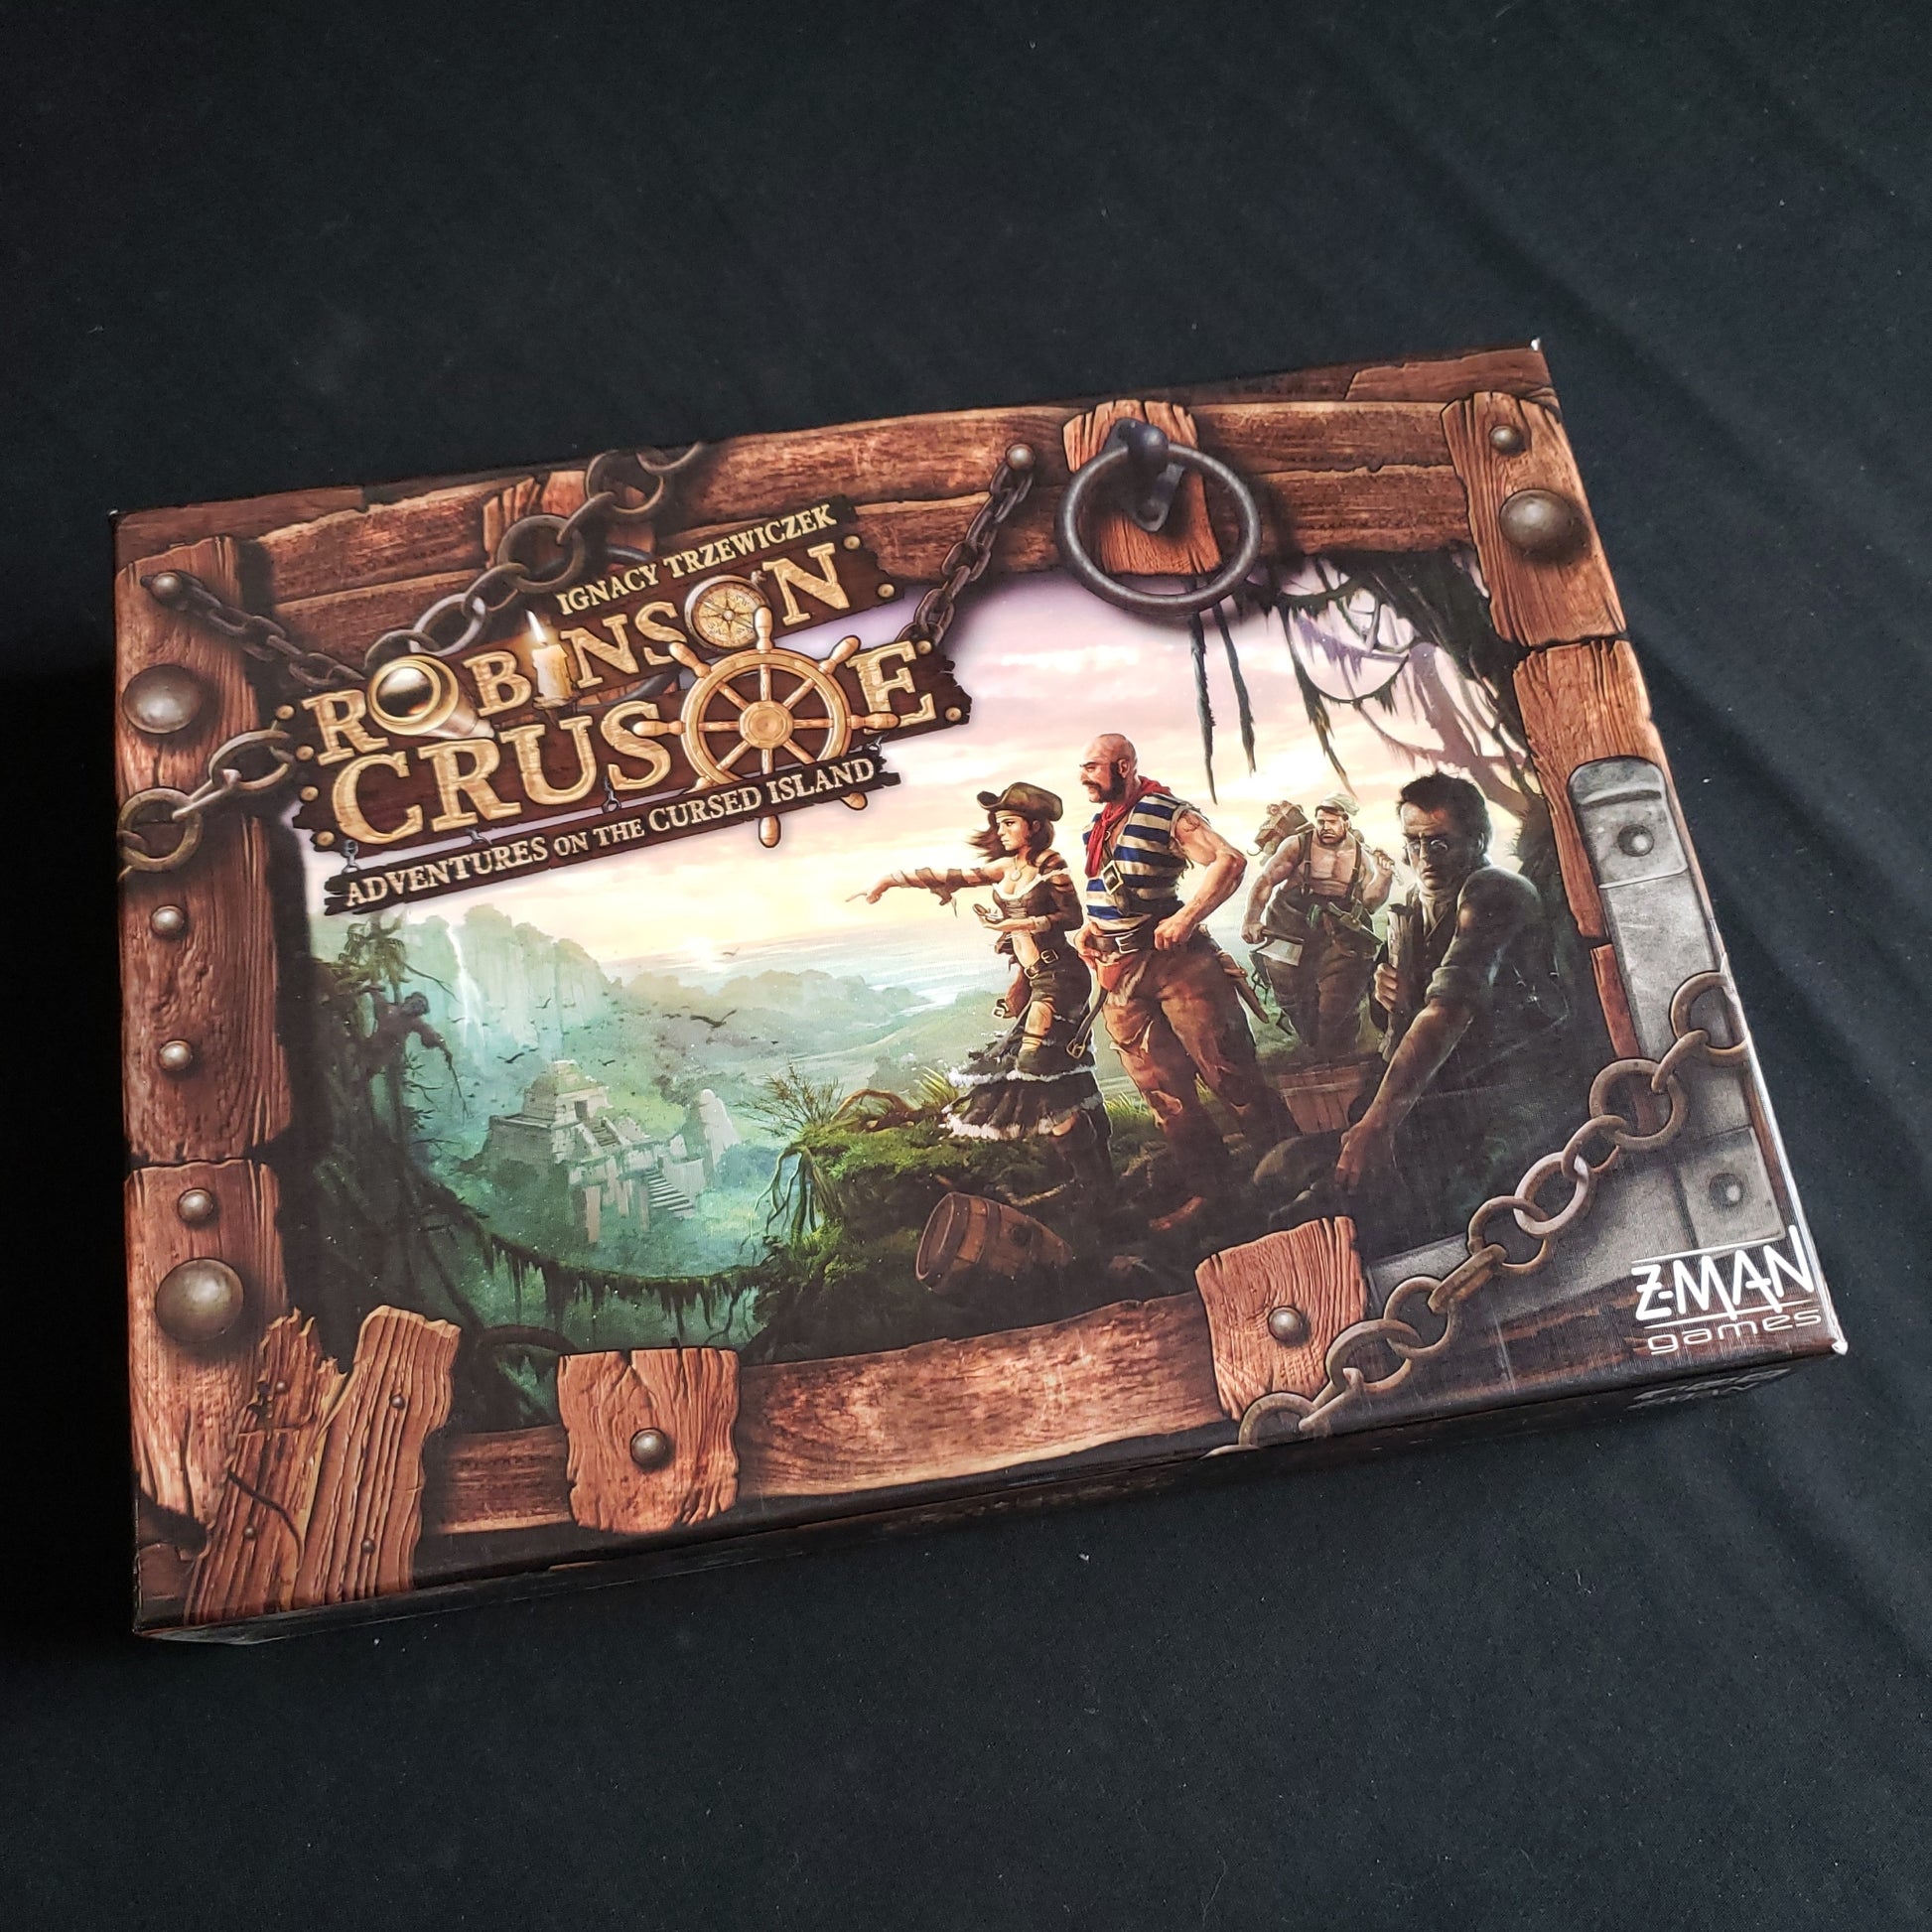 Image shows the front cover of the box of the Robinson Crusoe: Adventures on the Cursed Island board game